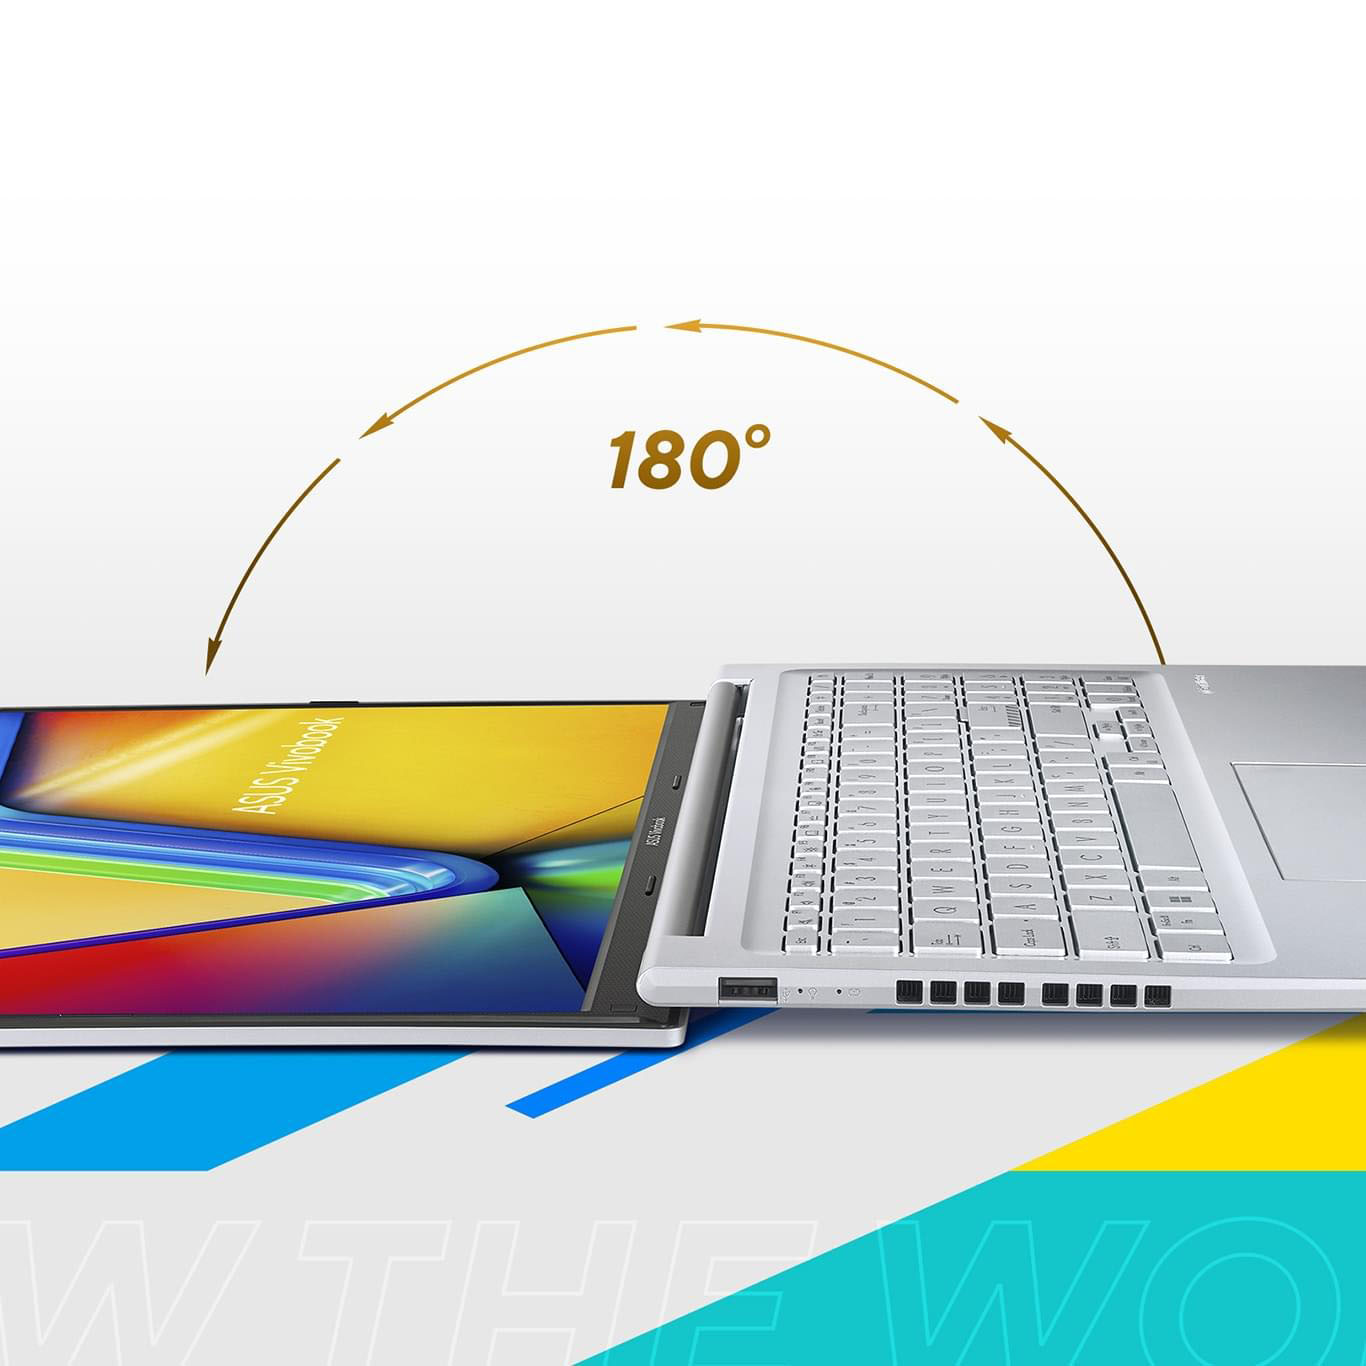 Vivobook 16 opened up to 180 degrees.